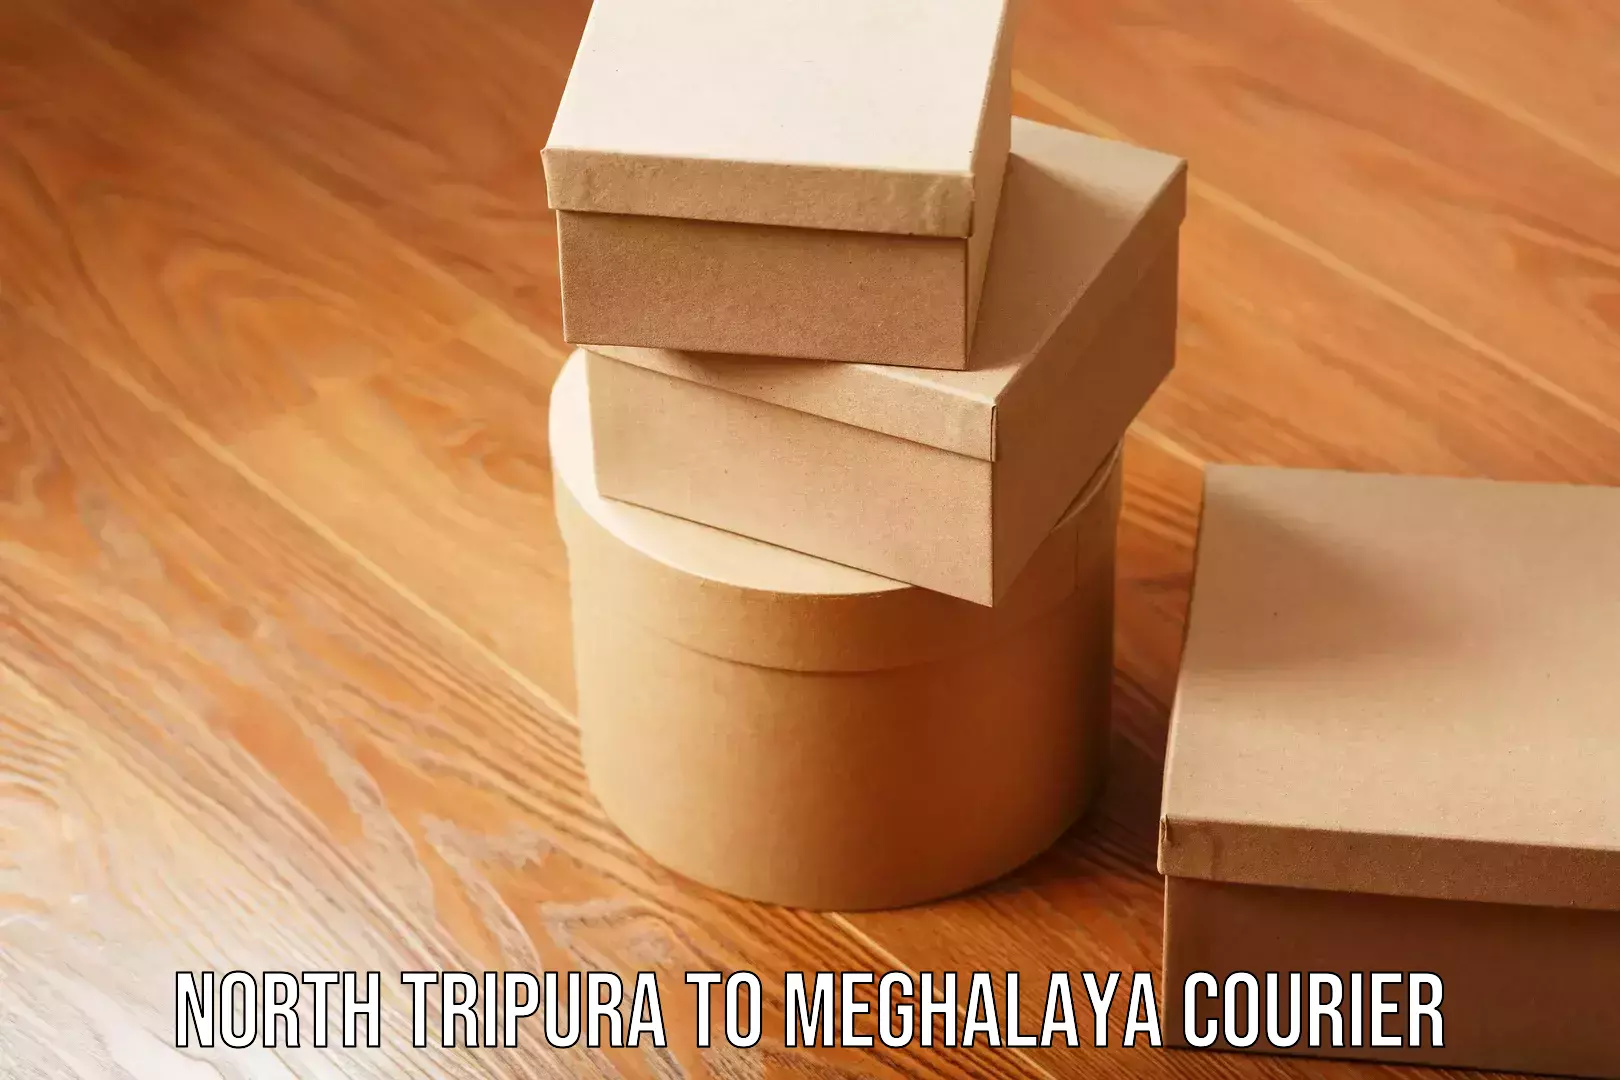 Tech-enabled shipping in North Tripura to Meghalaya